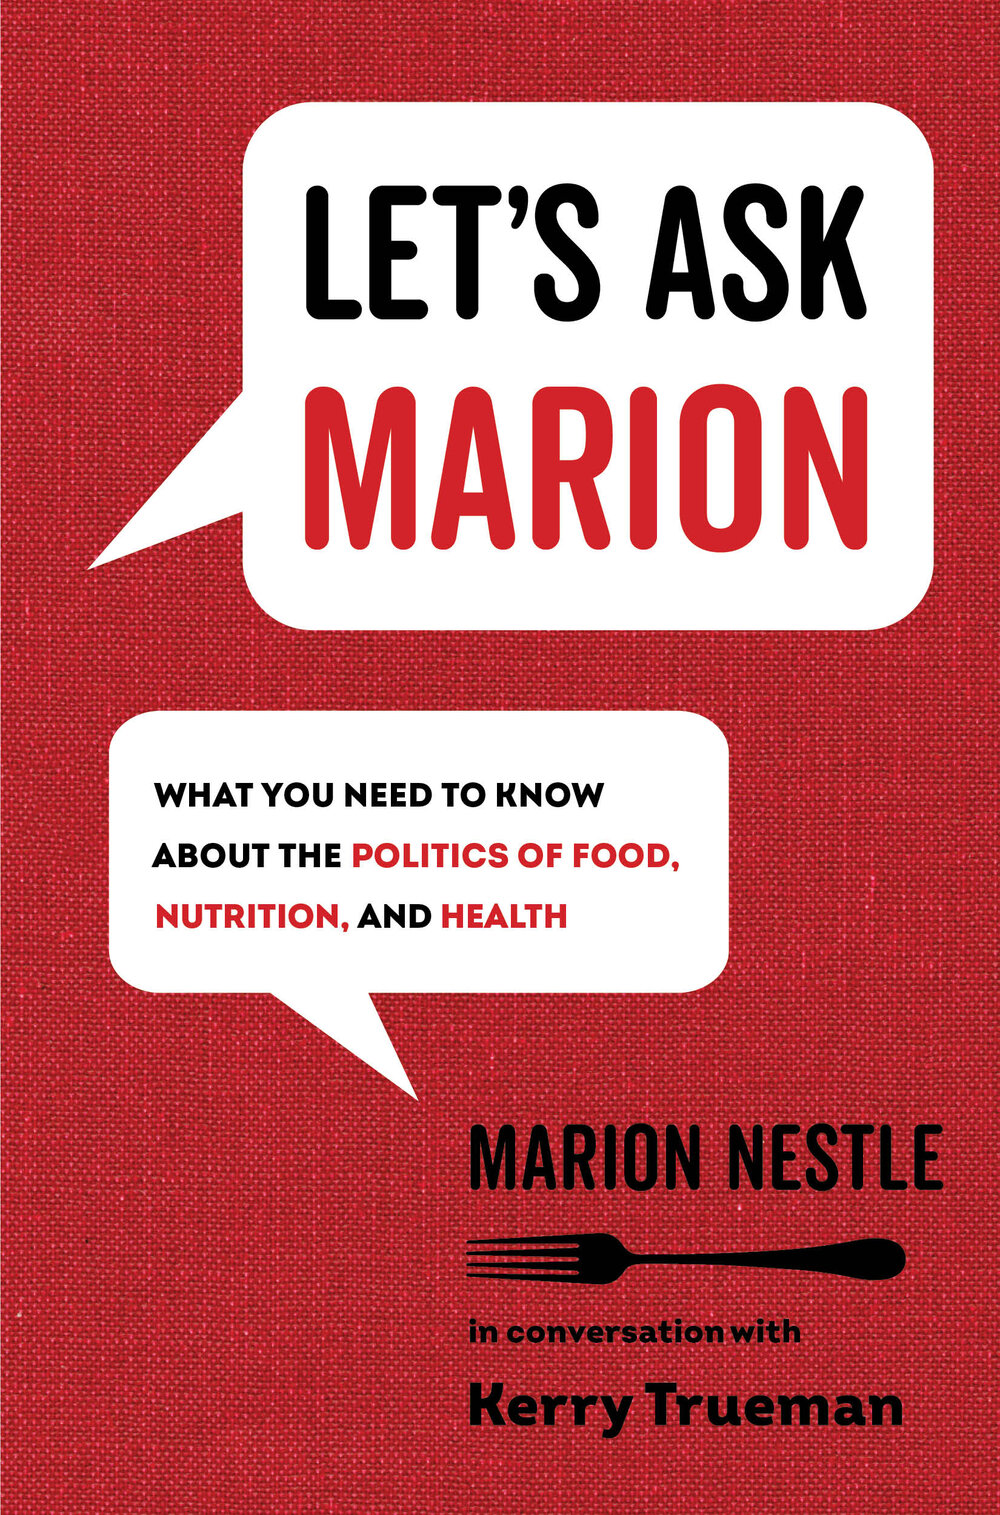 Let's Ask Marion: What you need to know about the politics of food, nutrition, and health by Marion Nestle